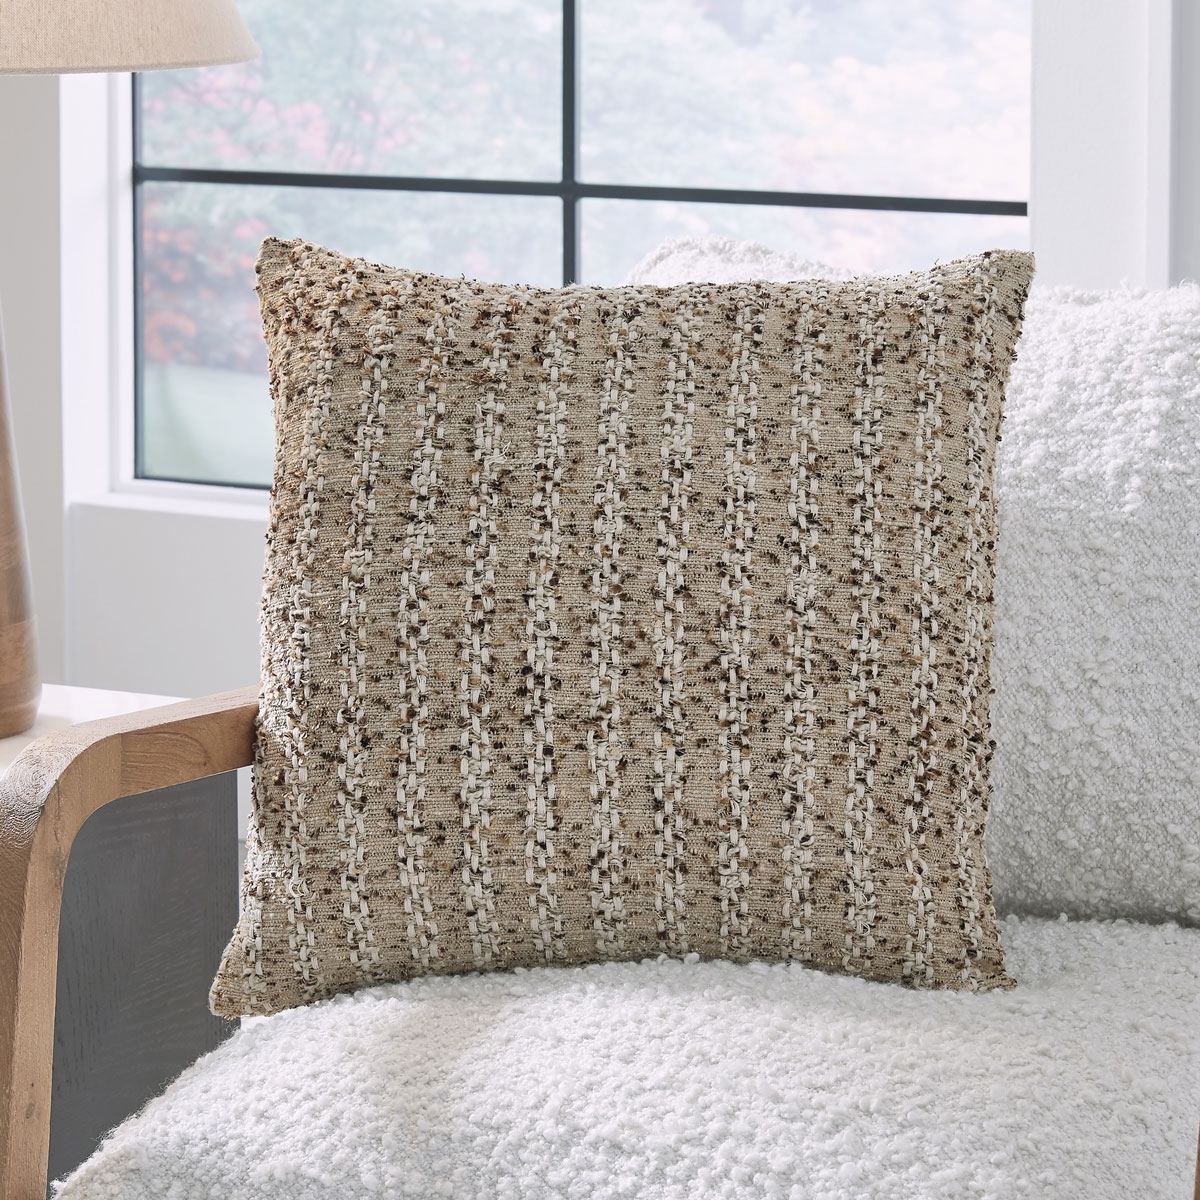 Picture of VORLANE TAN/BRN WOVEN PILLOW